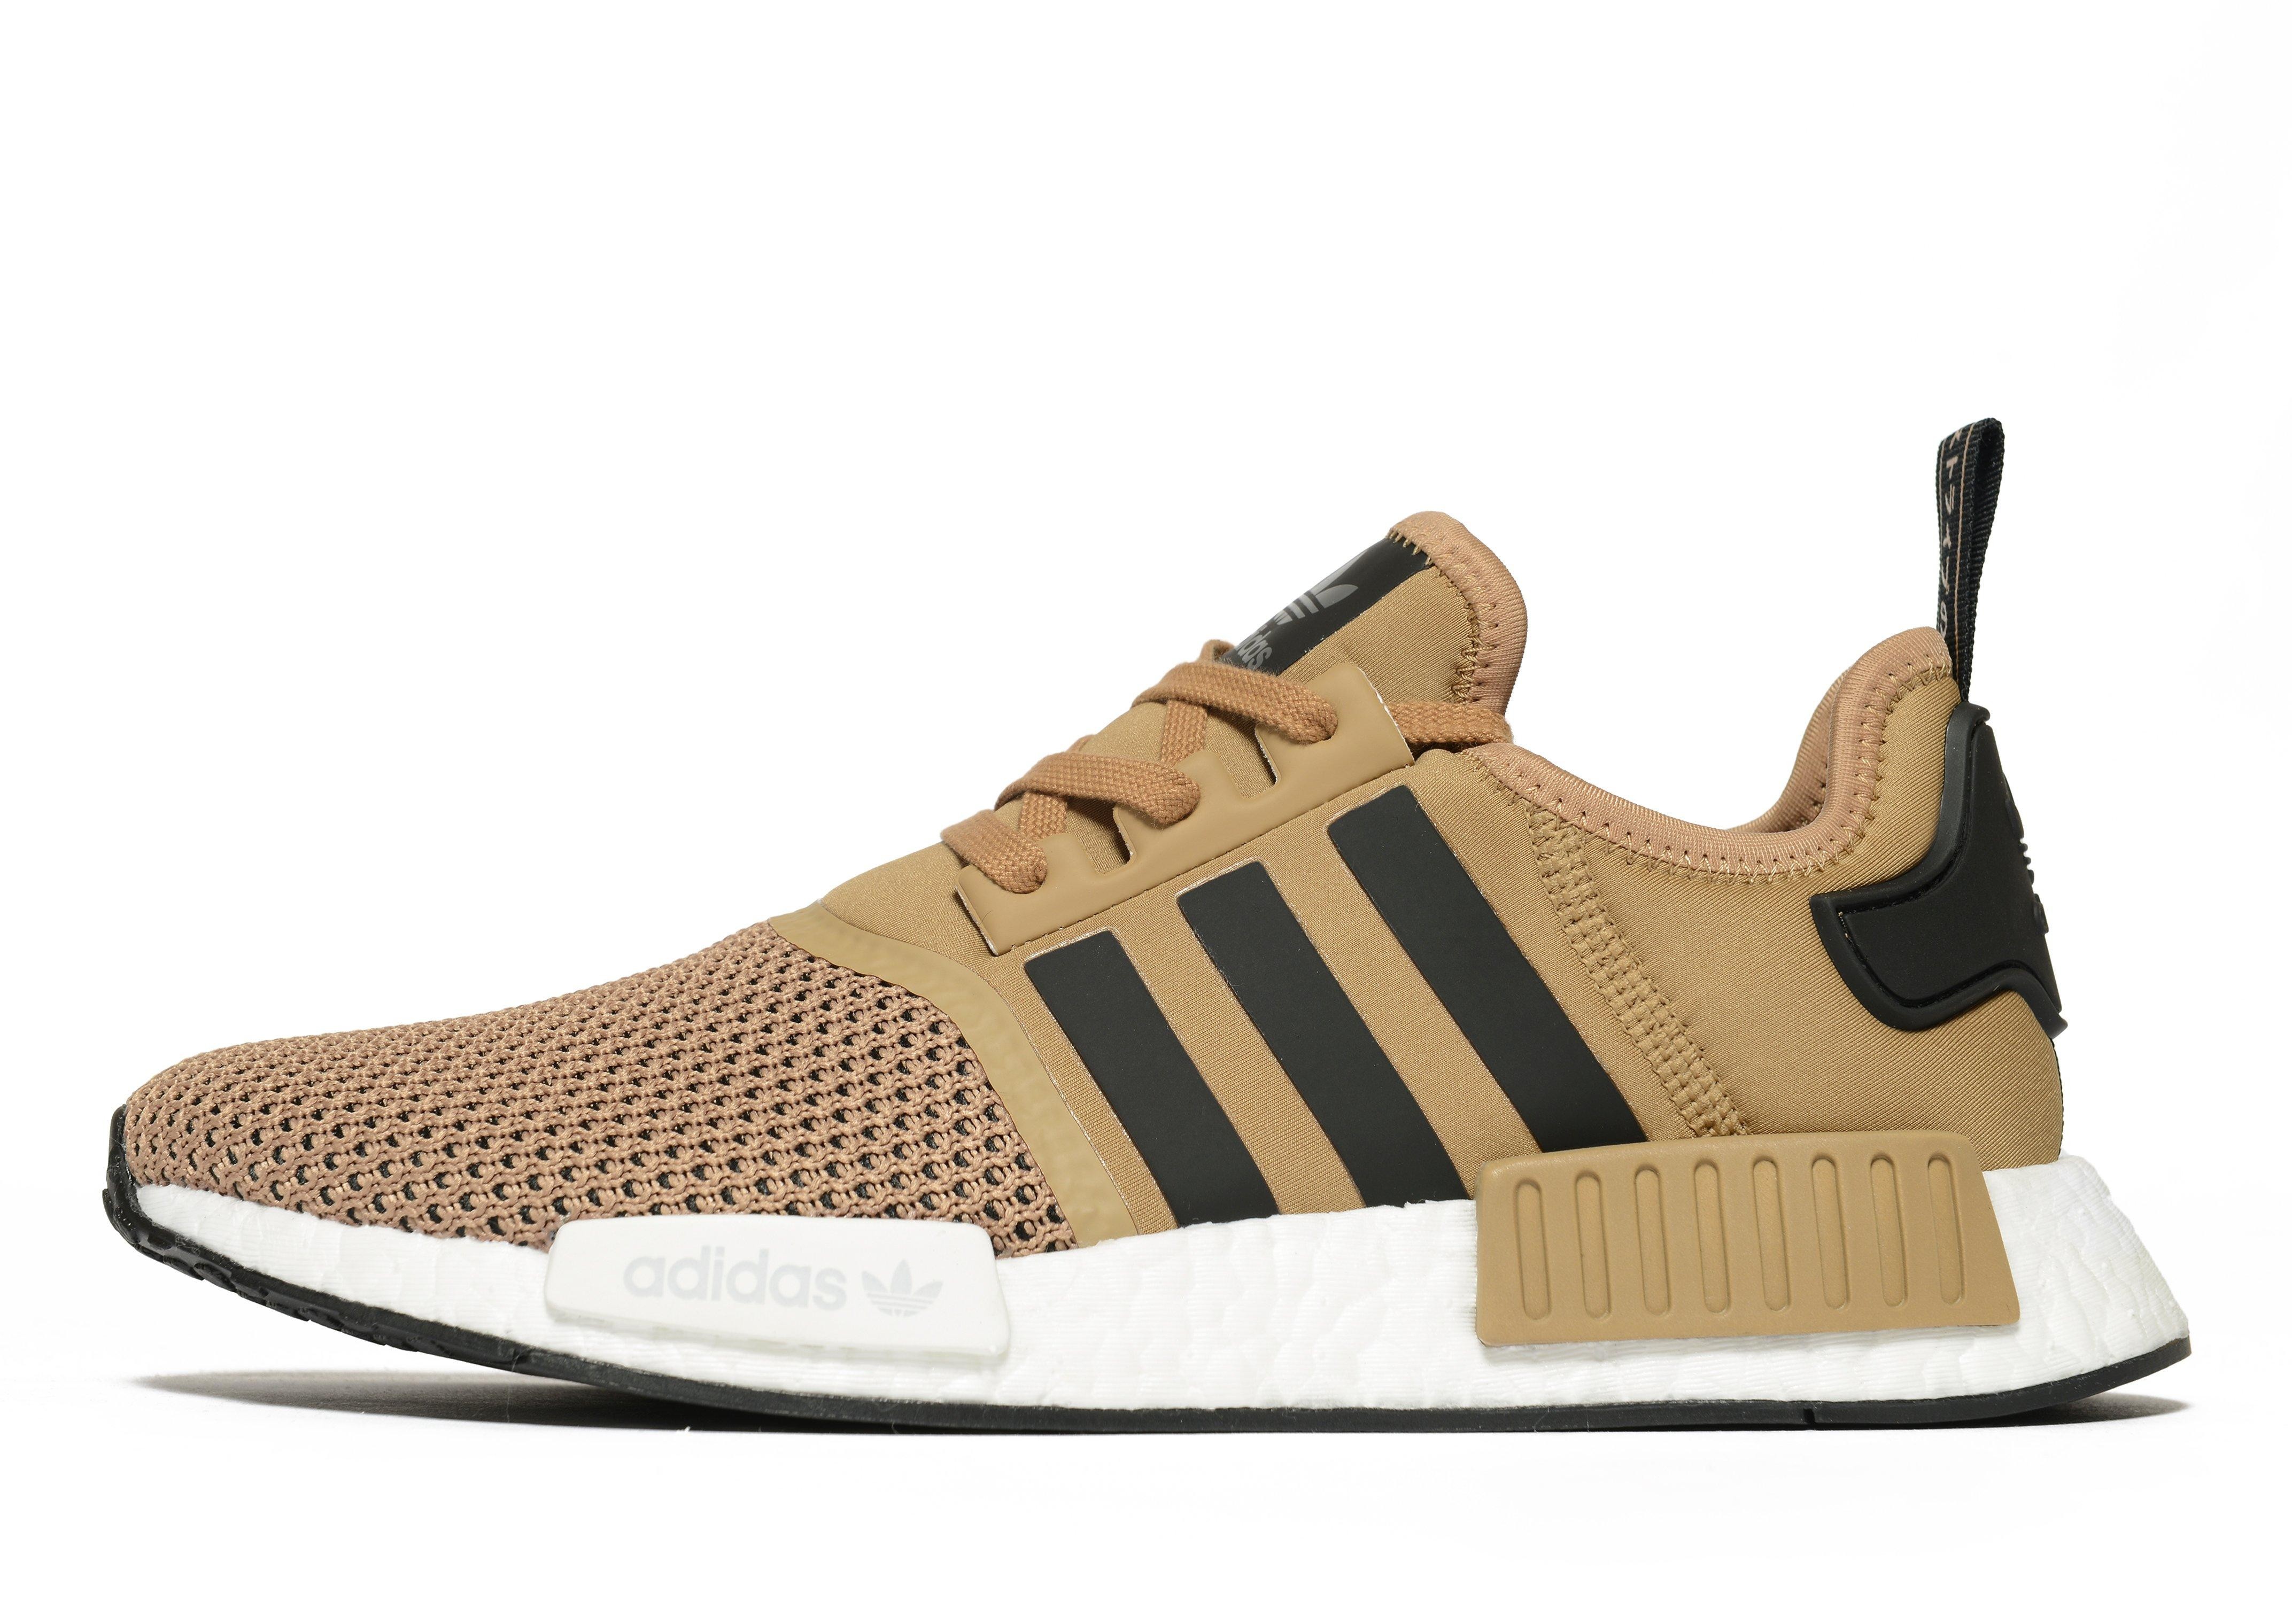 adidas nmd xr1 chaussure homme